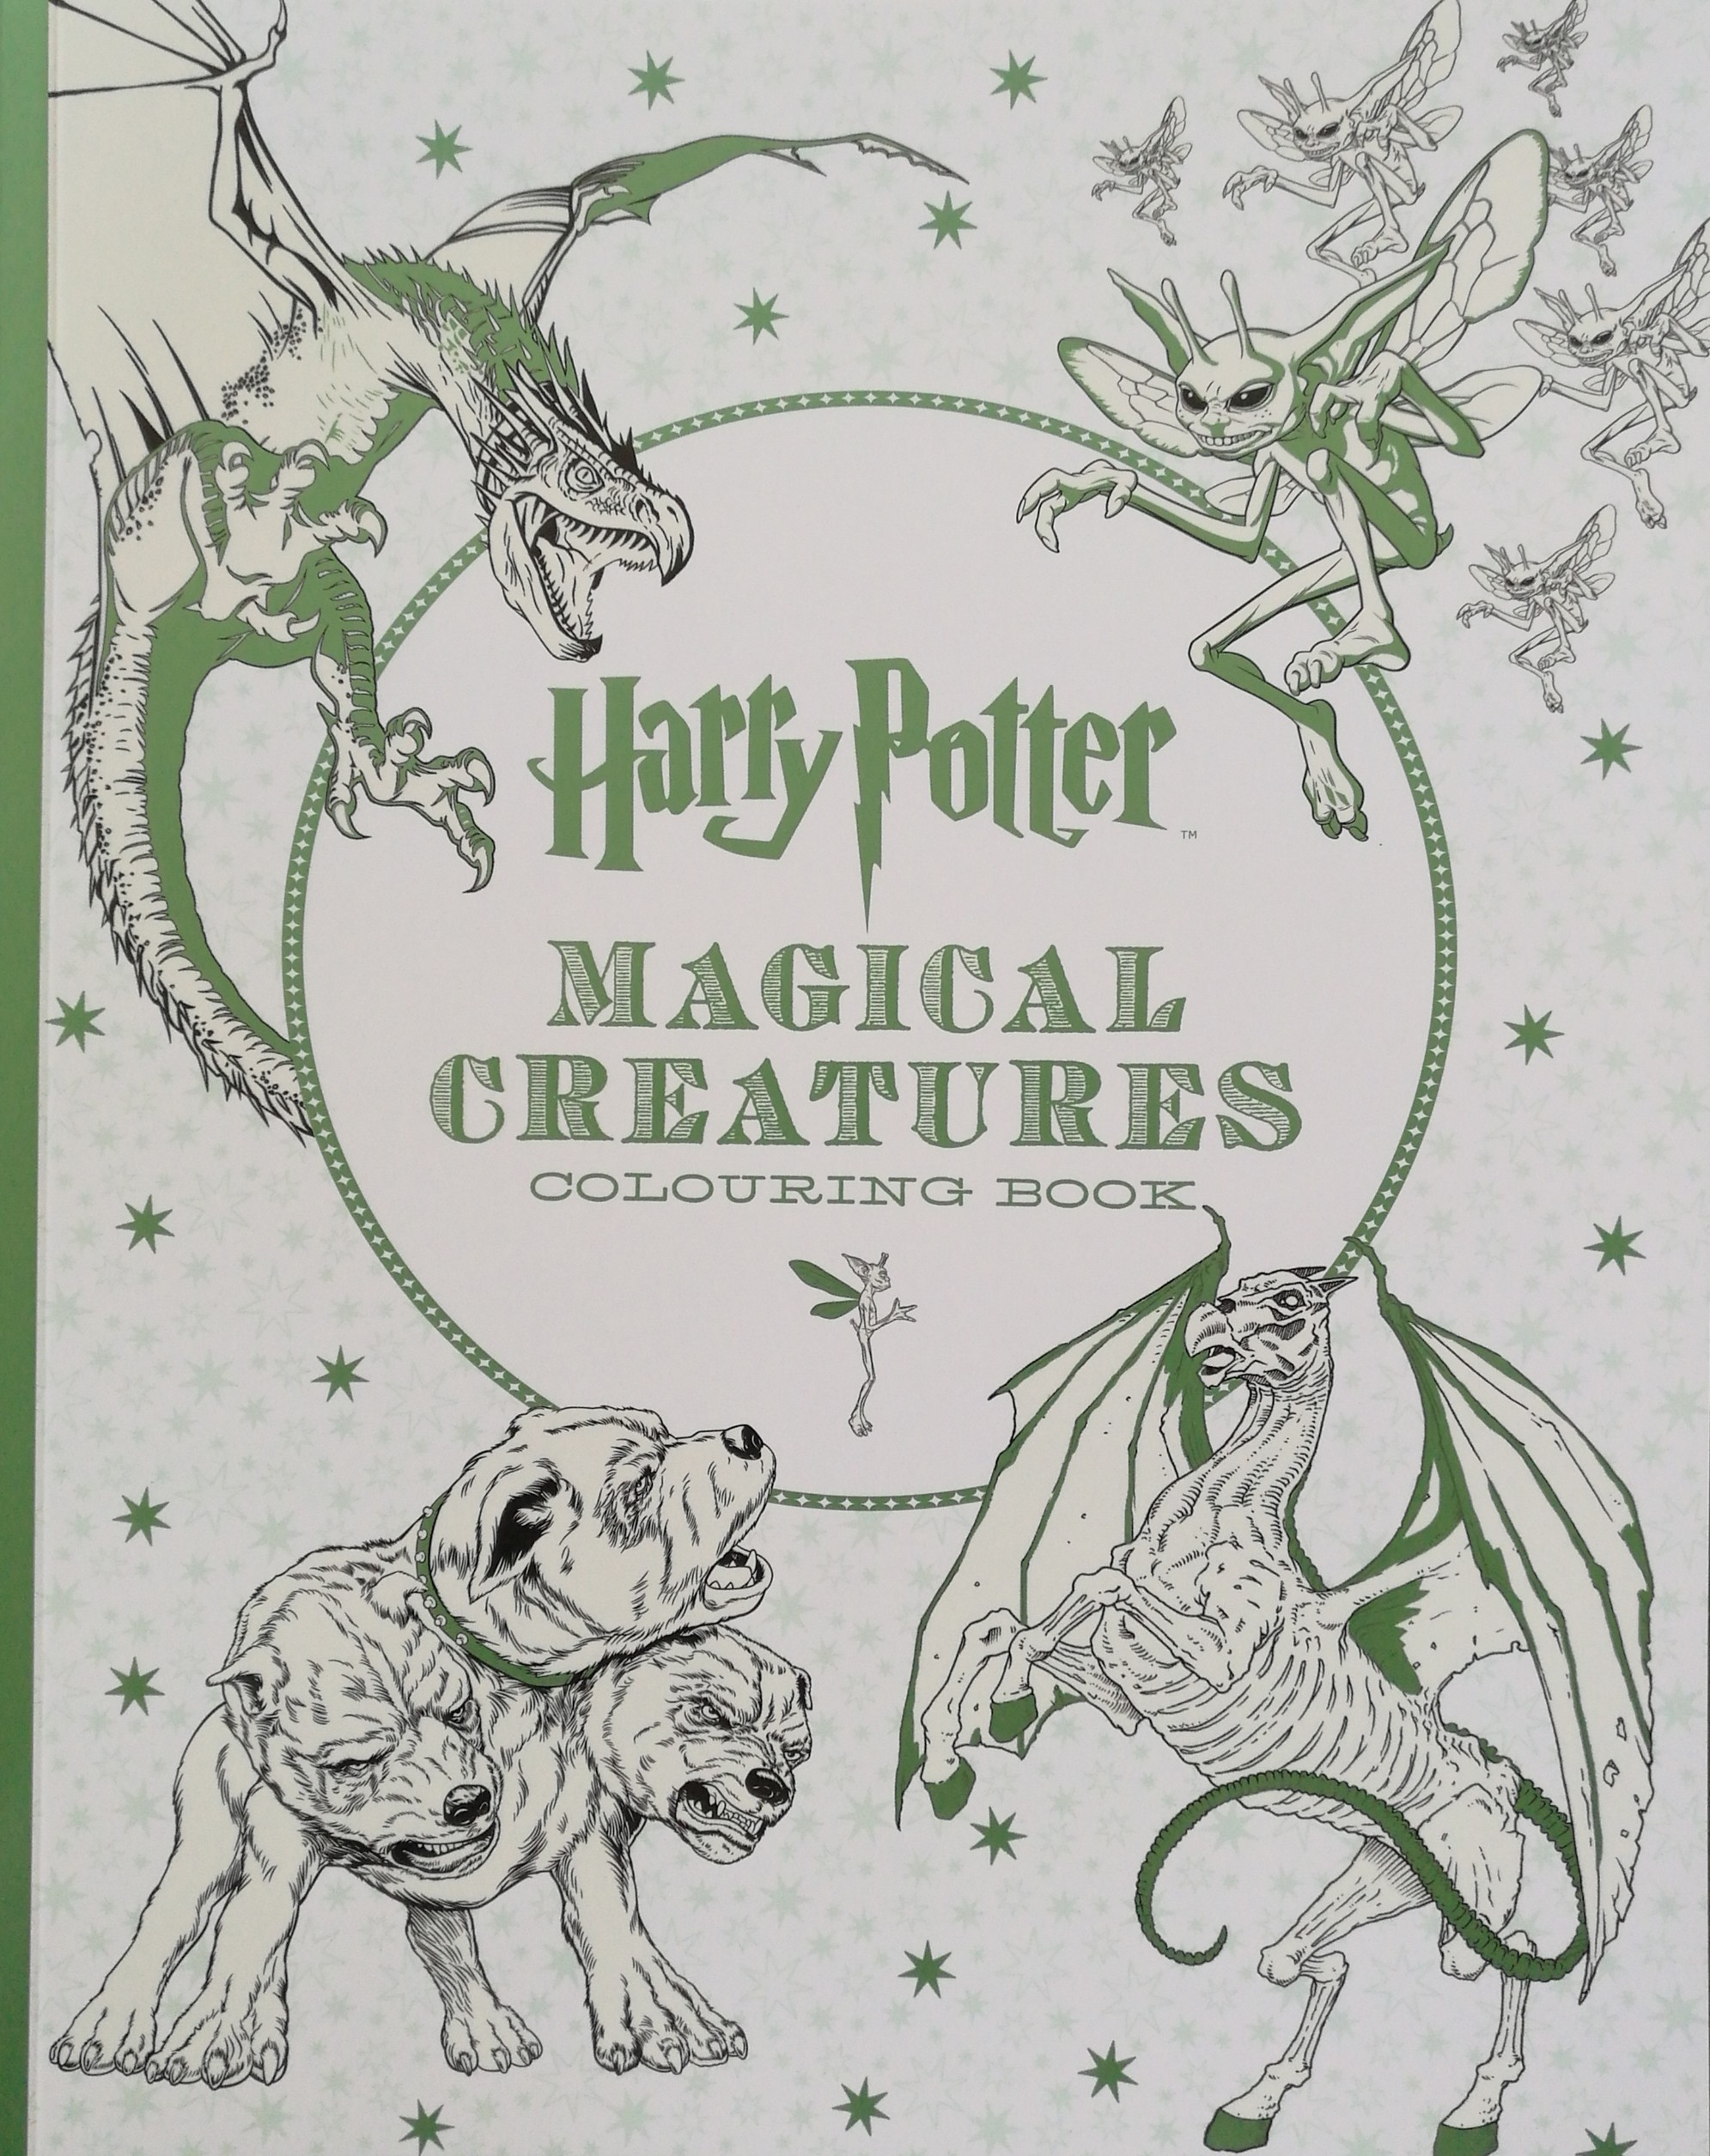 HARRY POTTER MAGICAL CREATURES COLOURING BOOK